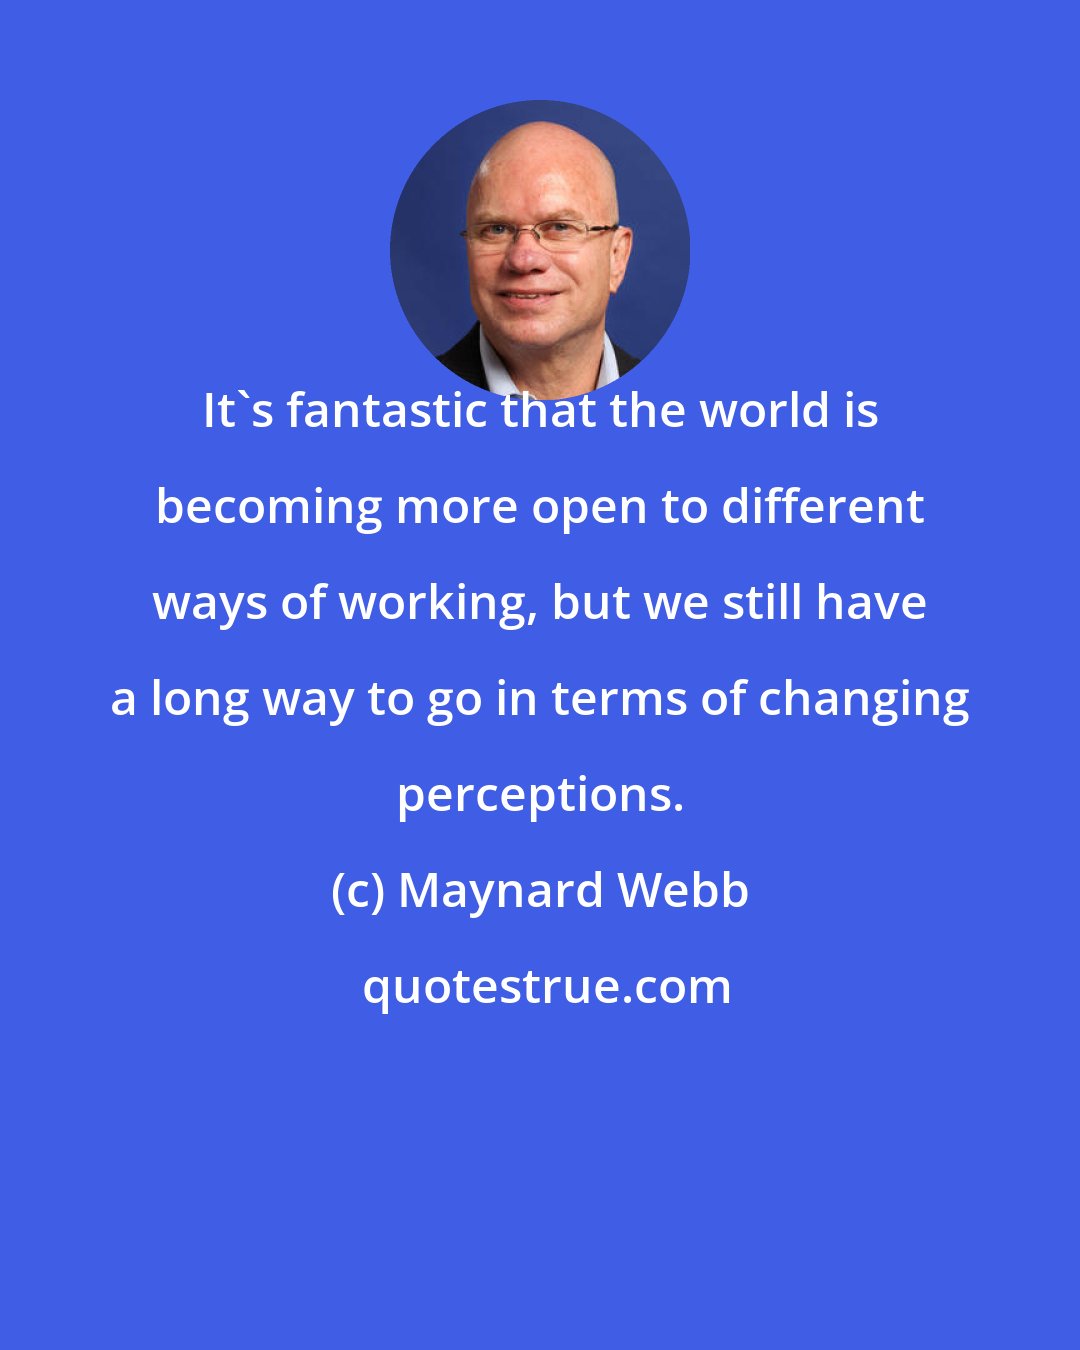 Maynard Webb: It's fantastic that the world is becoming more open to different ways of working, but we still have a long way to go in terms of changing perceptions.